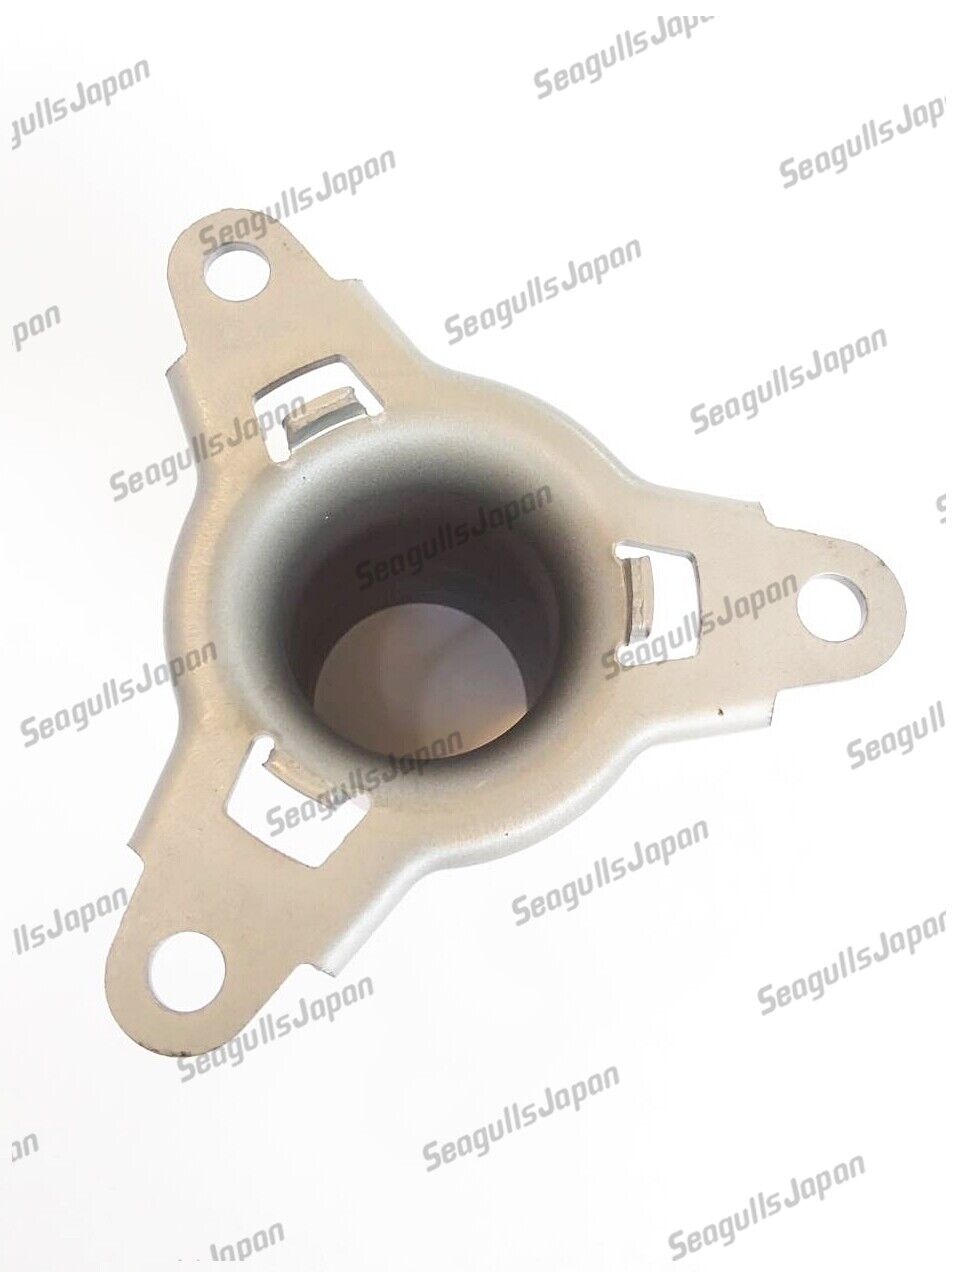 HONDA Genuine S2000  21103-PCY-003 Throw Out Release GUIDE RELEASE BEARING